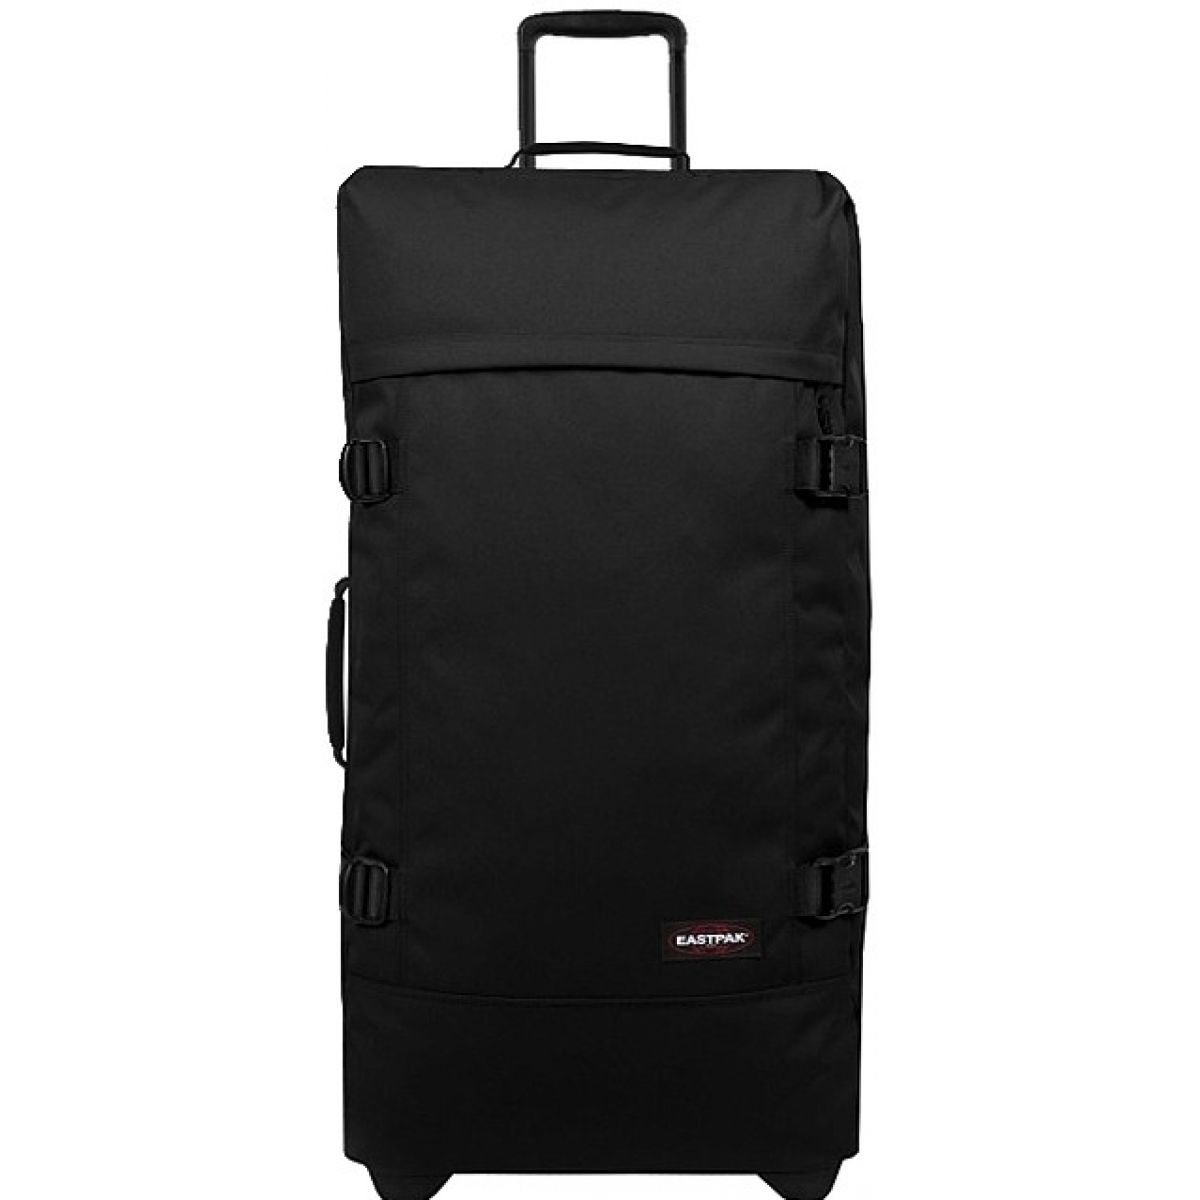 valise bagage à roulettes trolley Hold 4 Roues Sac étui environ 71.12 cm Extra Large XL 28 in 